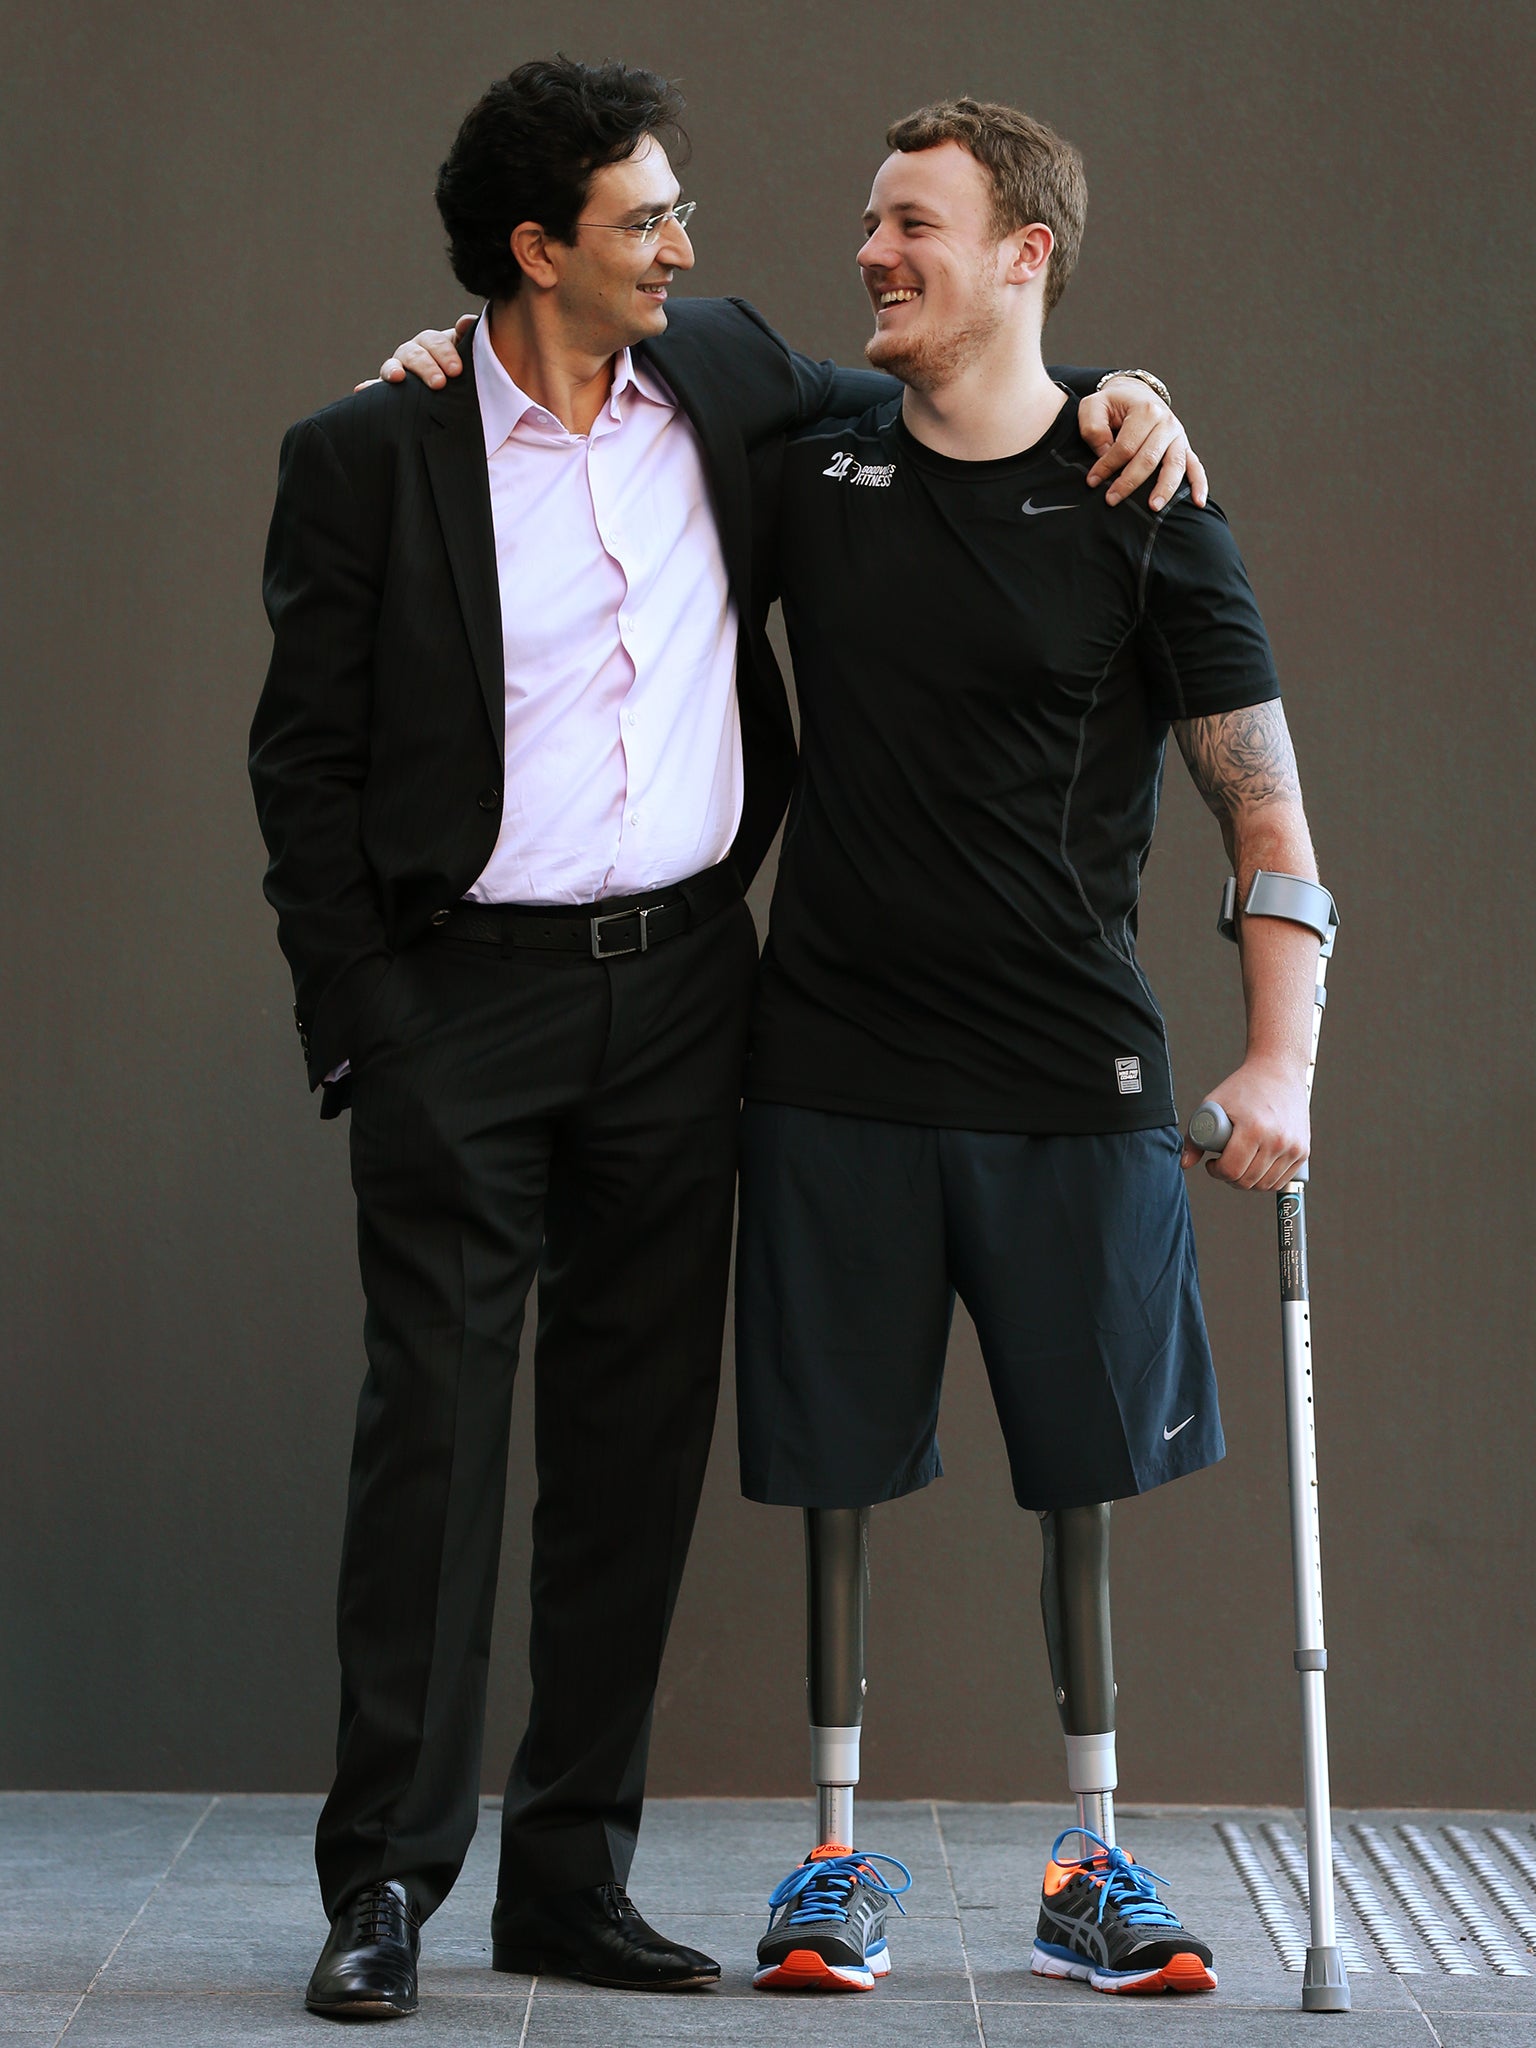 Dr Munjed Al Muderis, left, performed the the osseointegration procedure on amputee Michael Swain, right